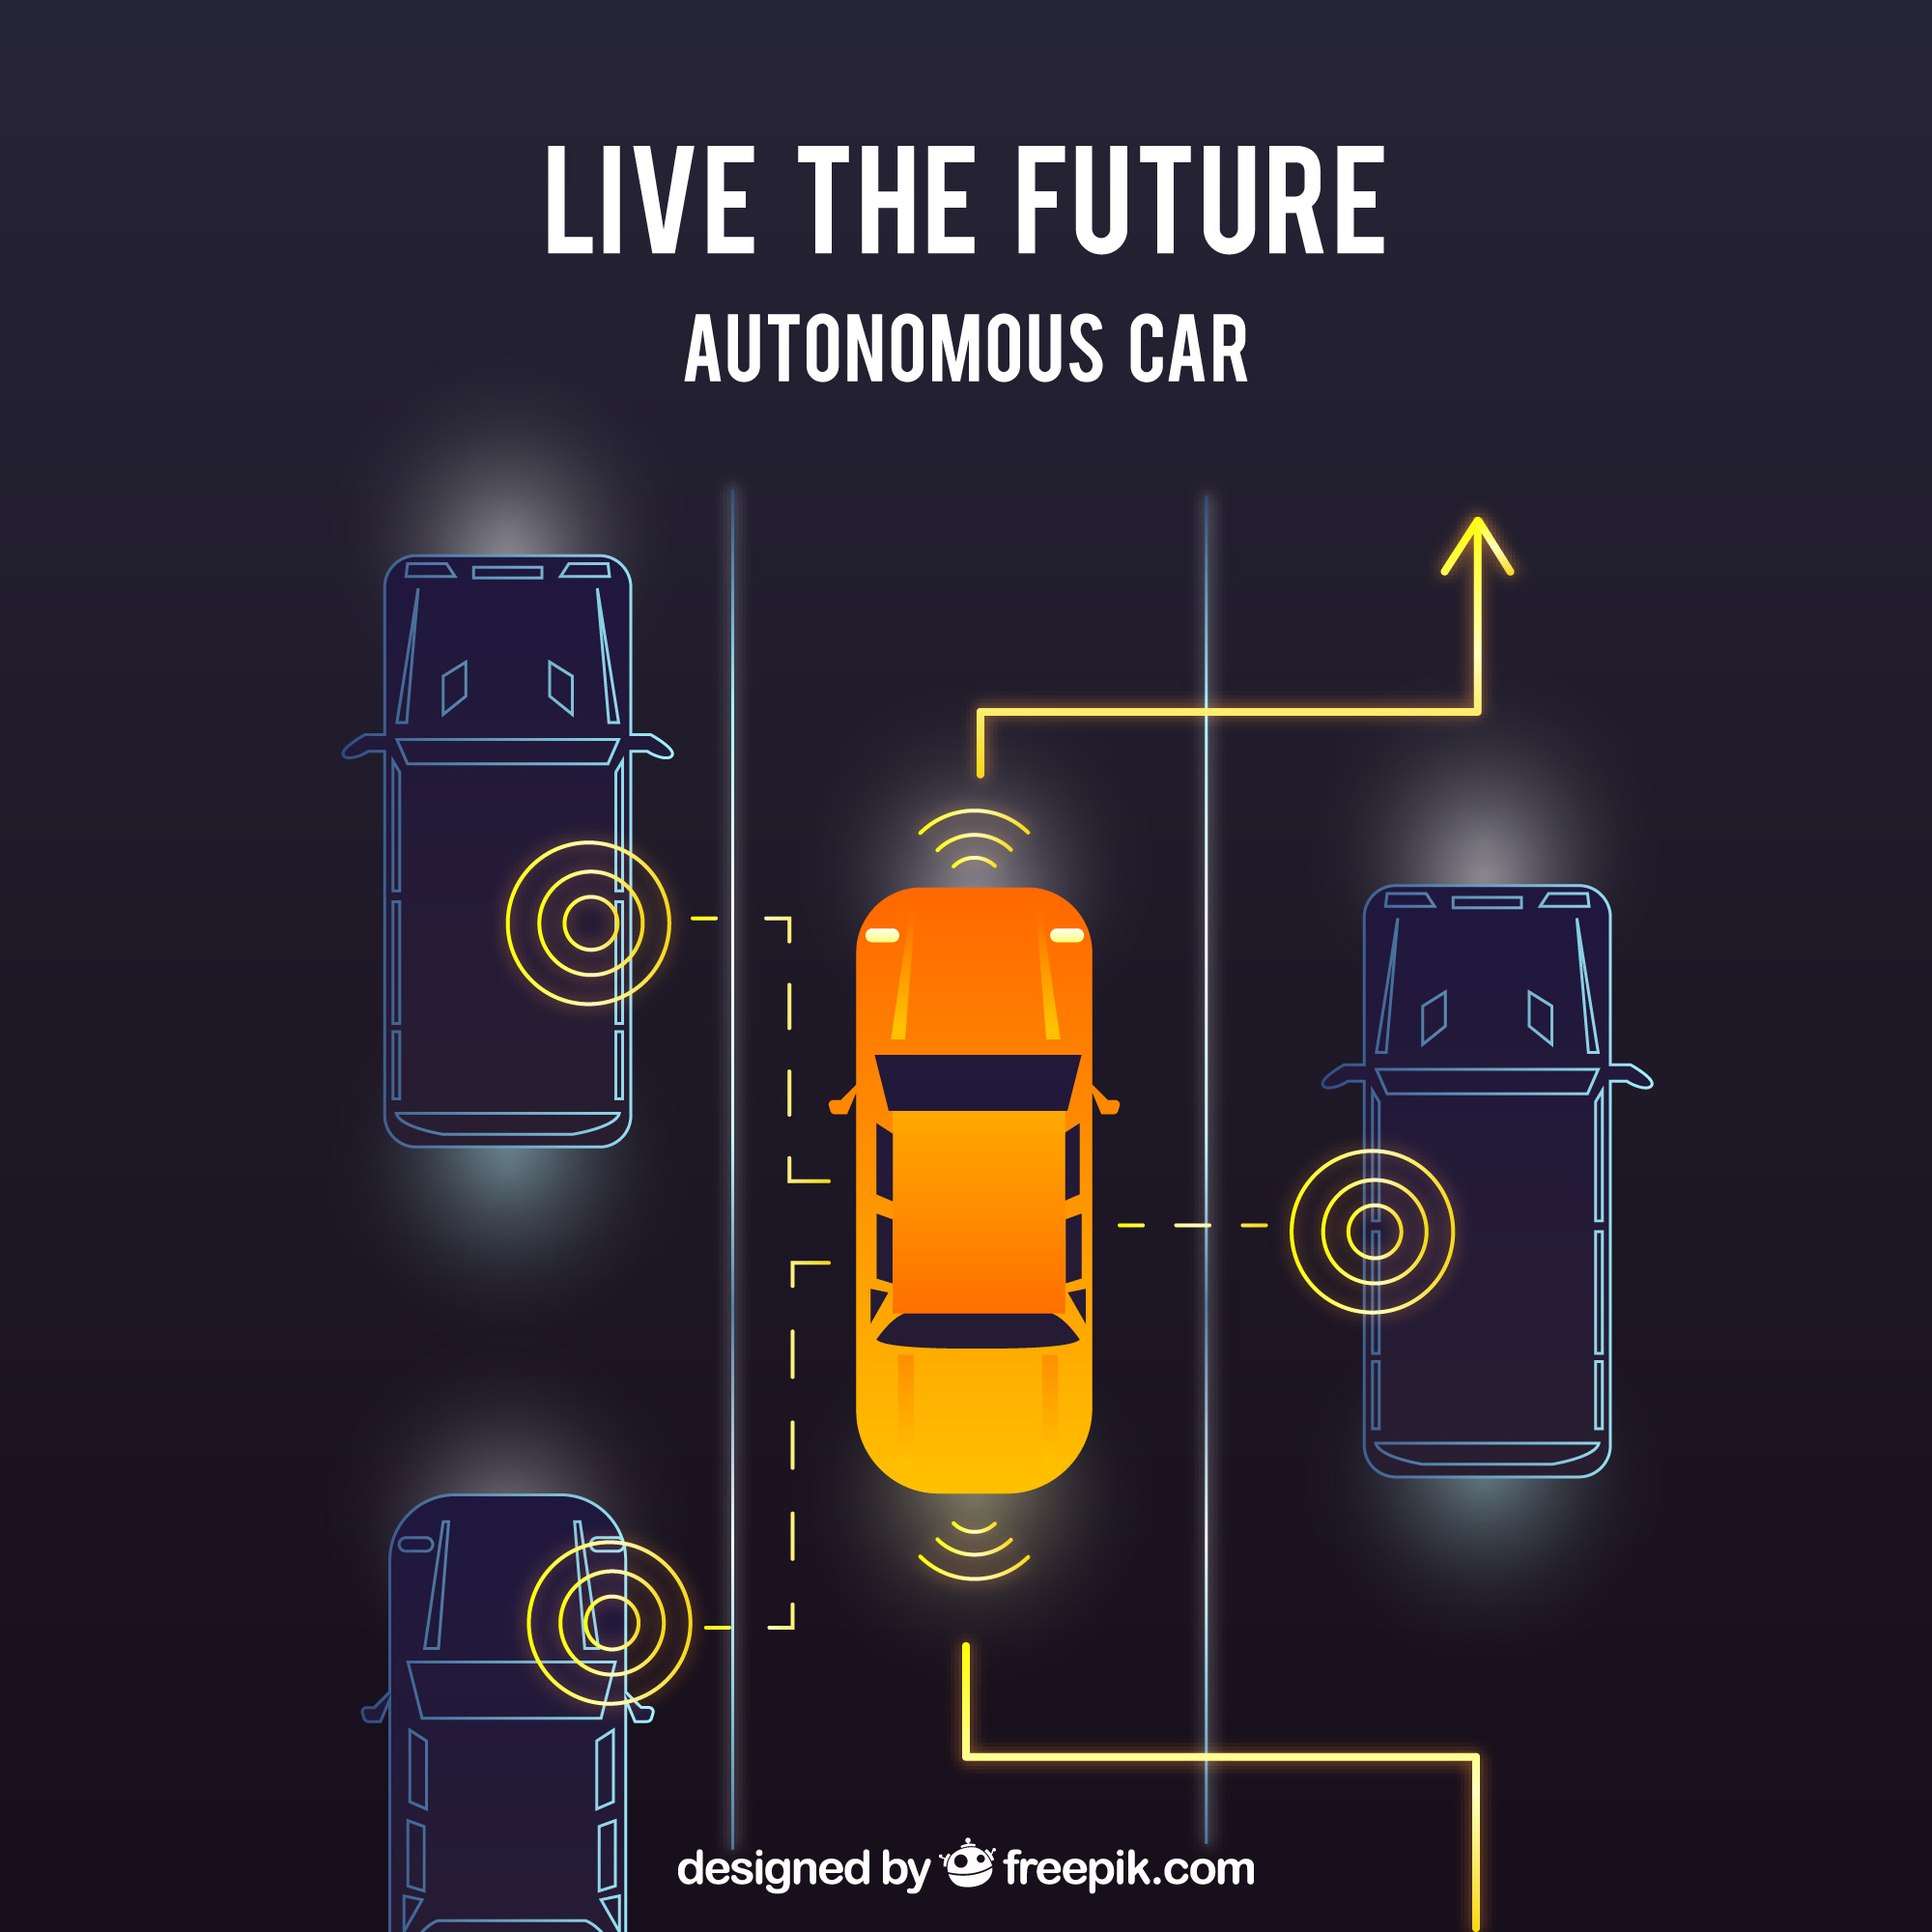 New Level 4 Autonomous Driving Regulation propels Germany to driverless mobility 2